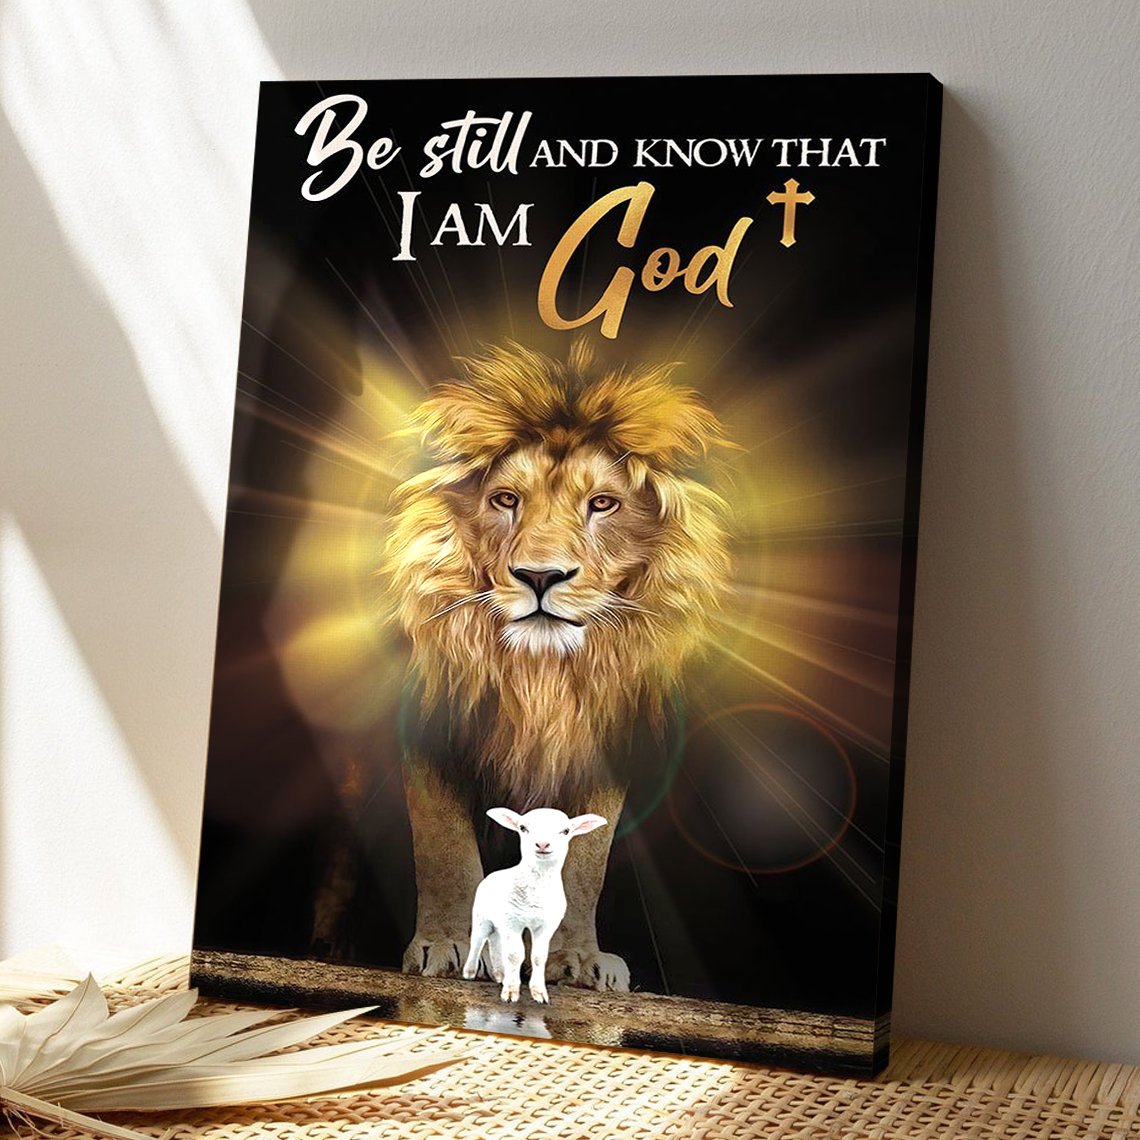 Christian Canvas Art - Be Still And Know That I Am God - Lion And Lamp Canvas - Scripture Canvas - Ciaocustom